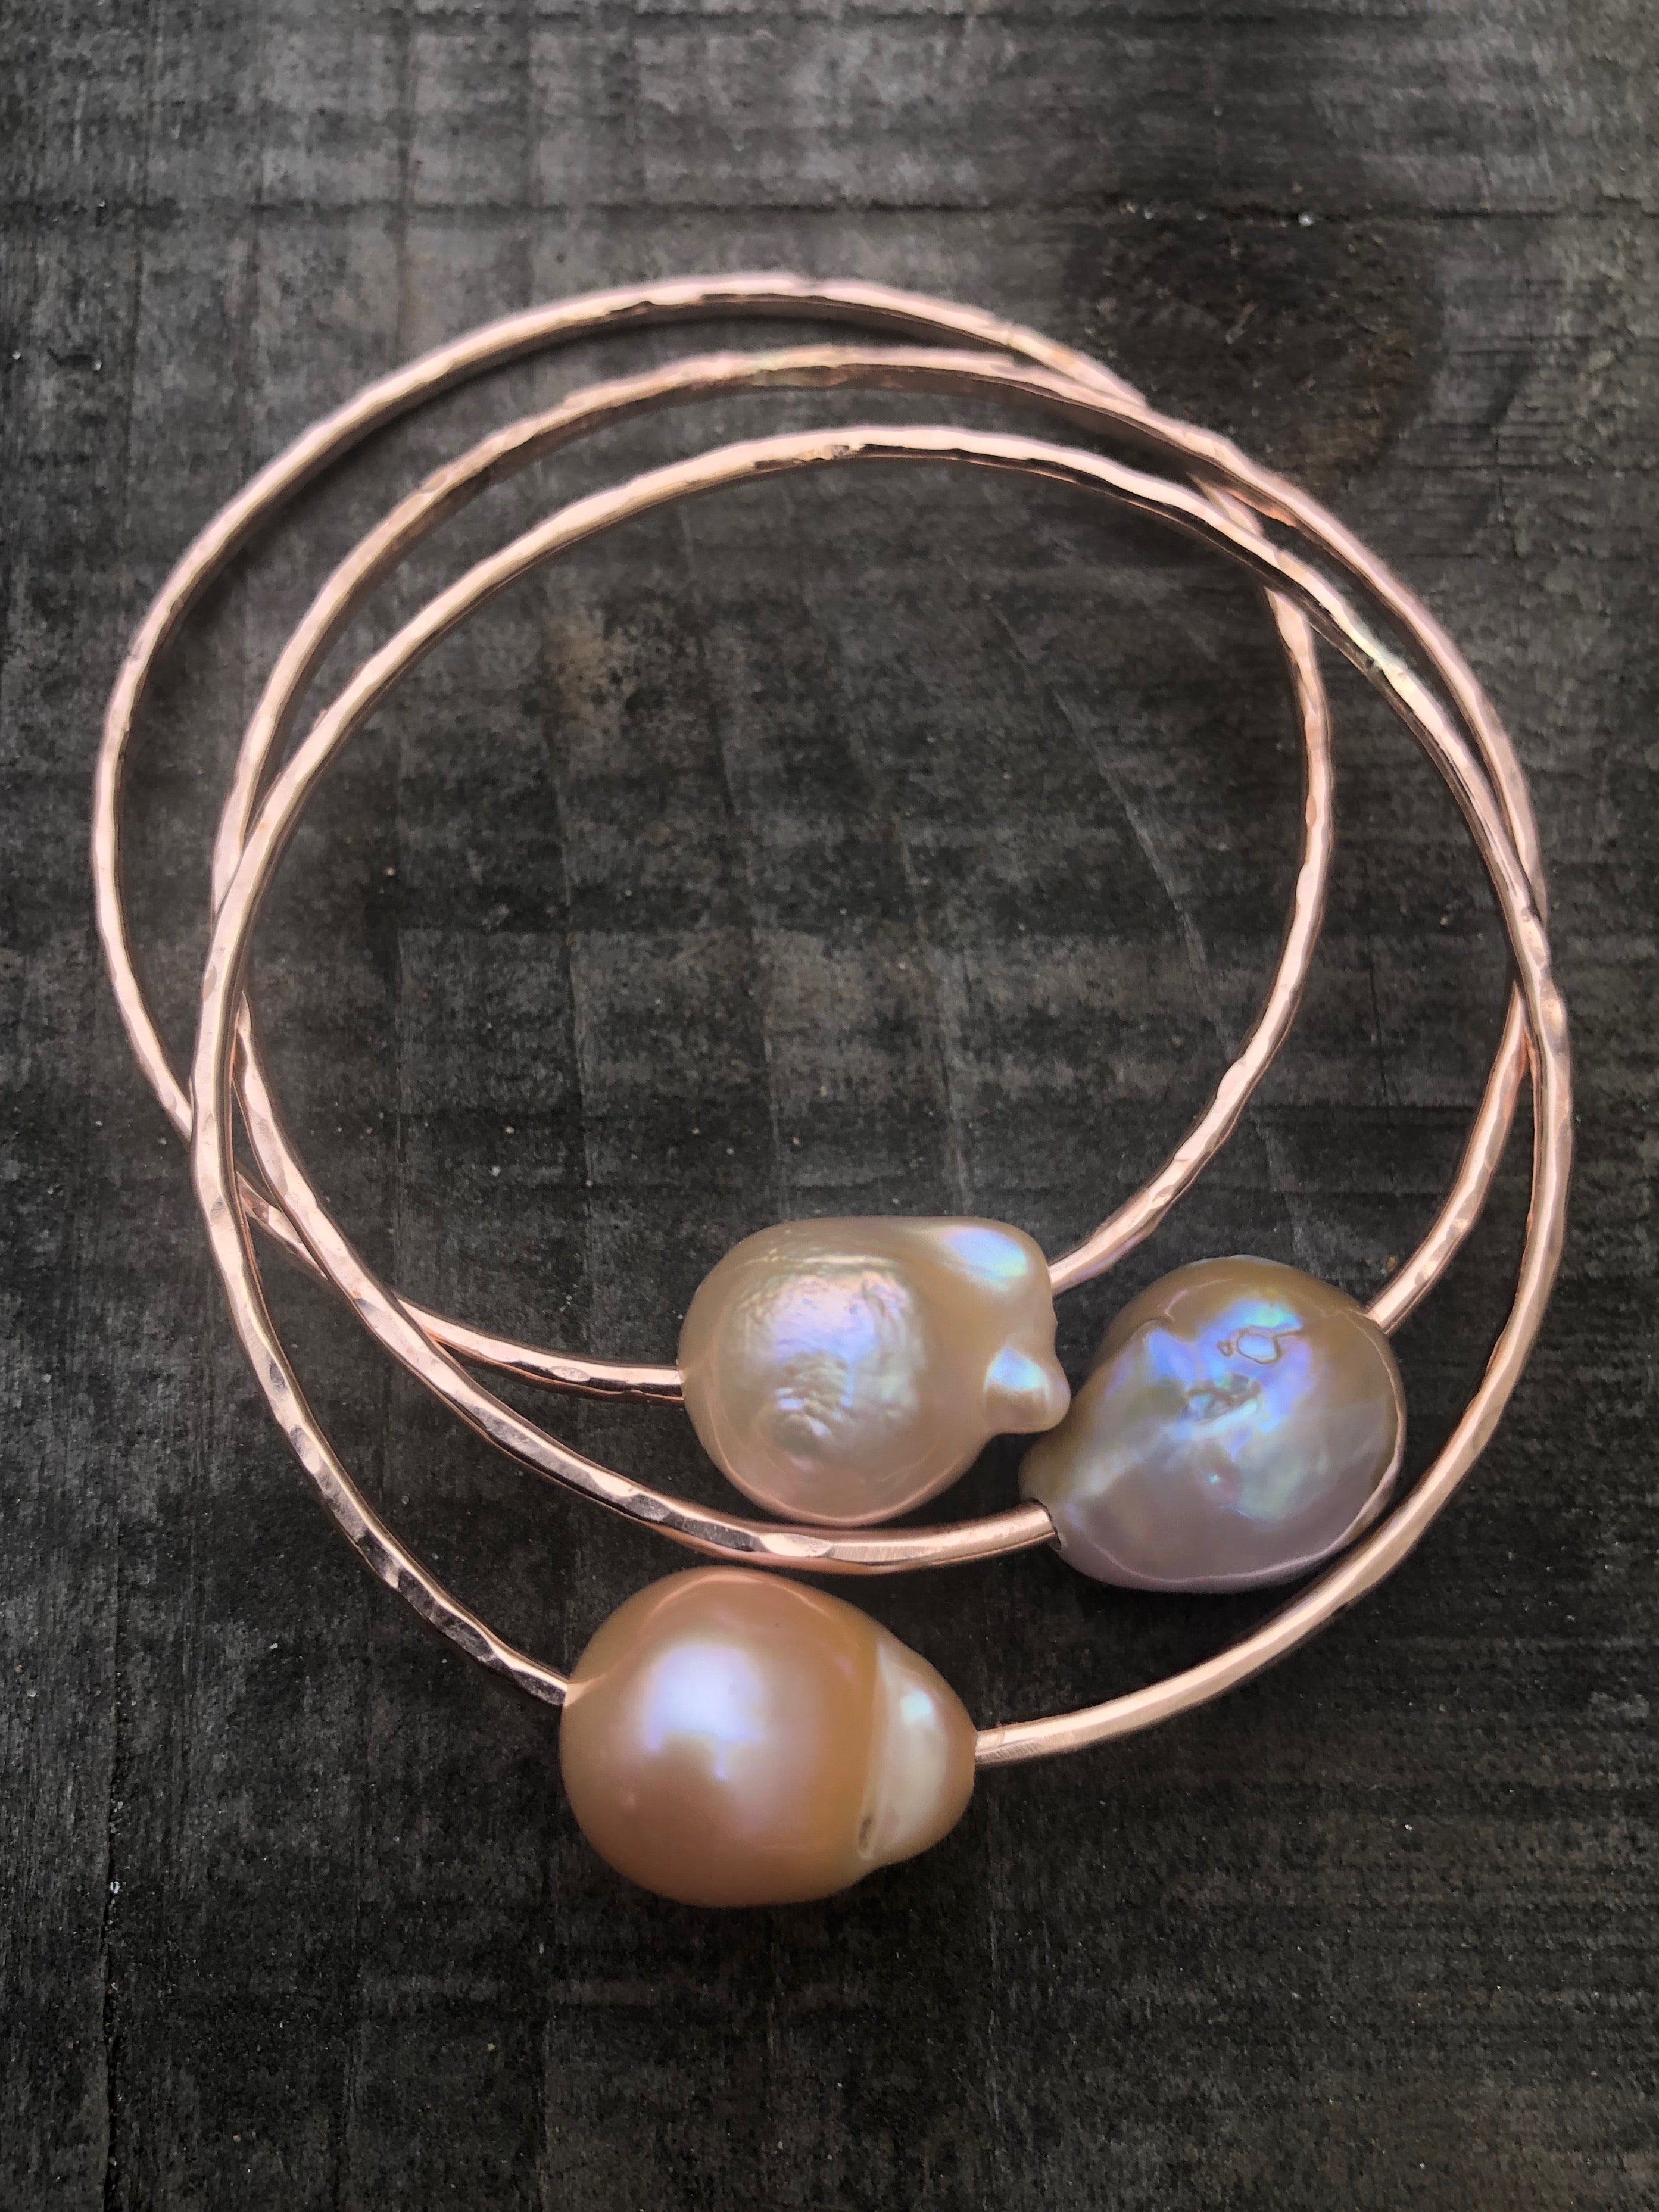 Three gold bangles with large oddly shaped fireball pearls in light hues of pink and peach and white on a wooden background.